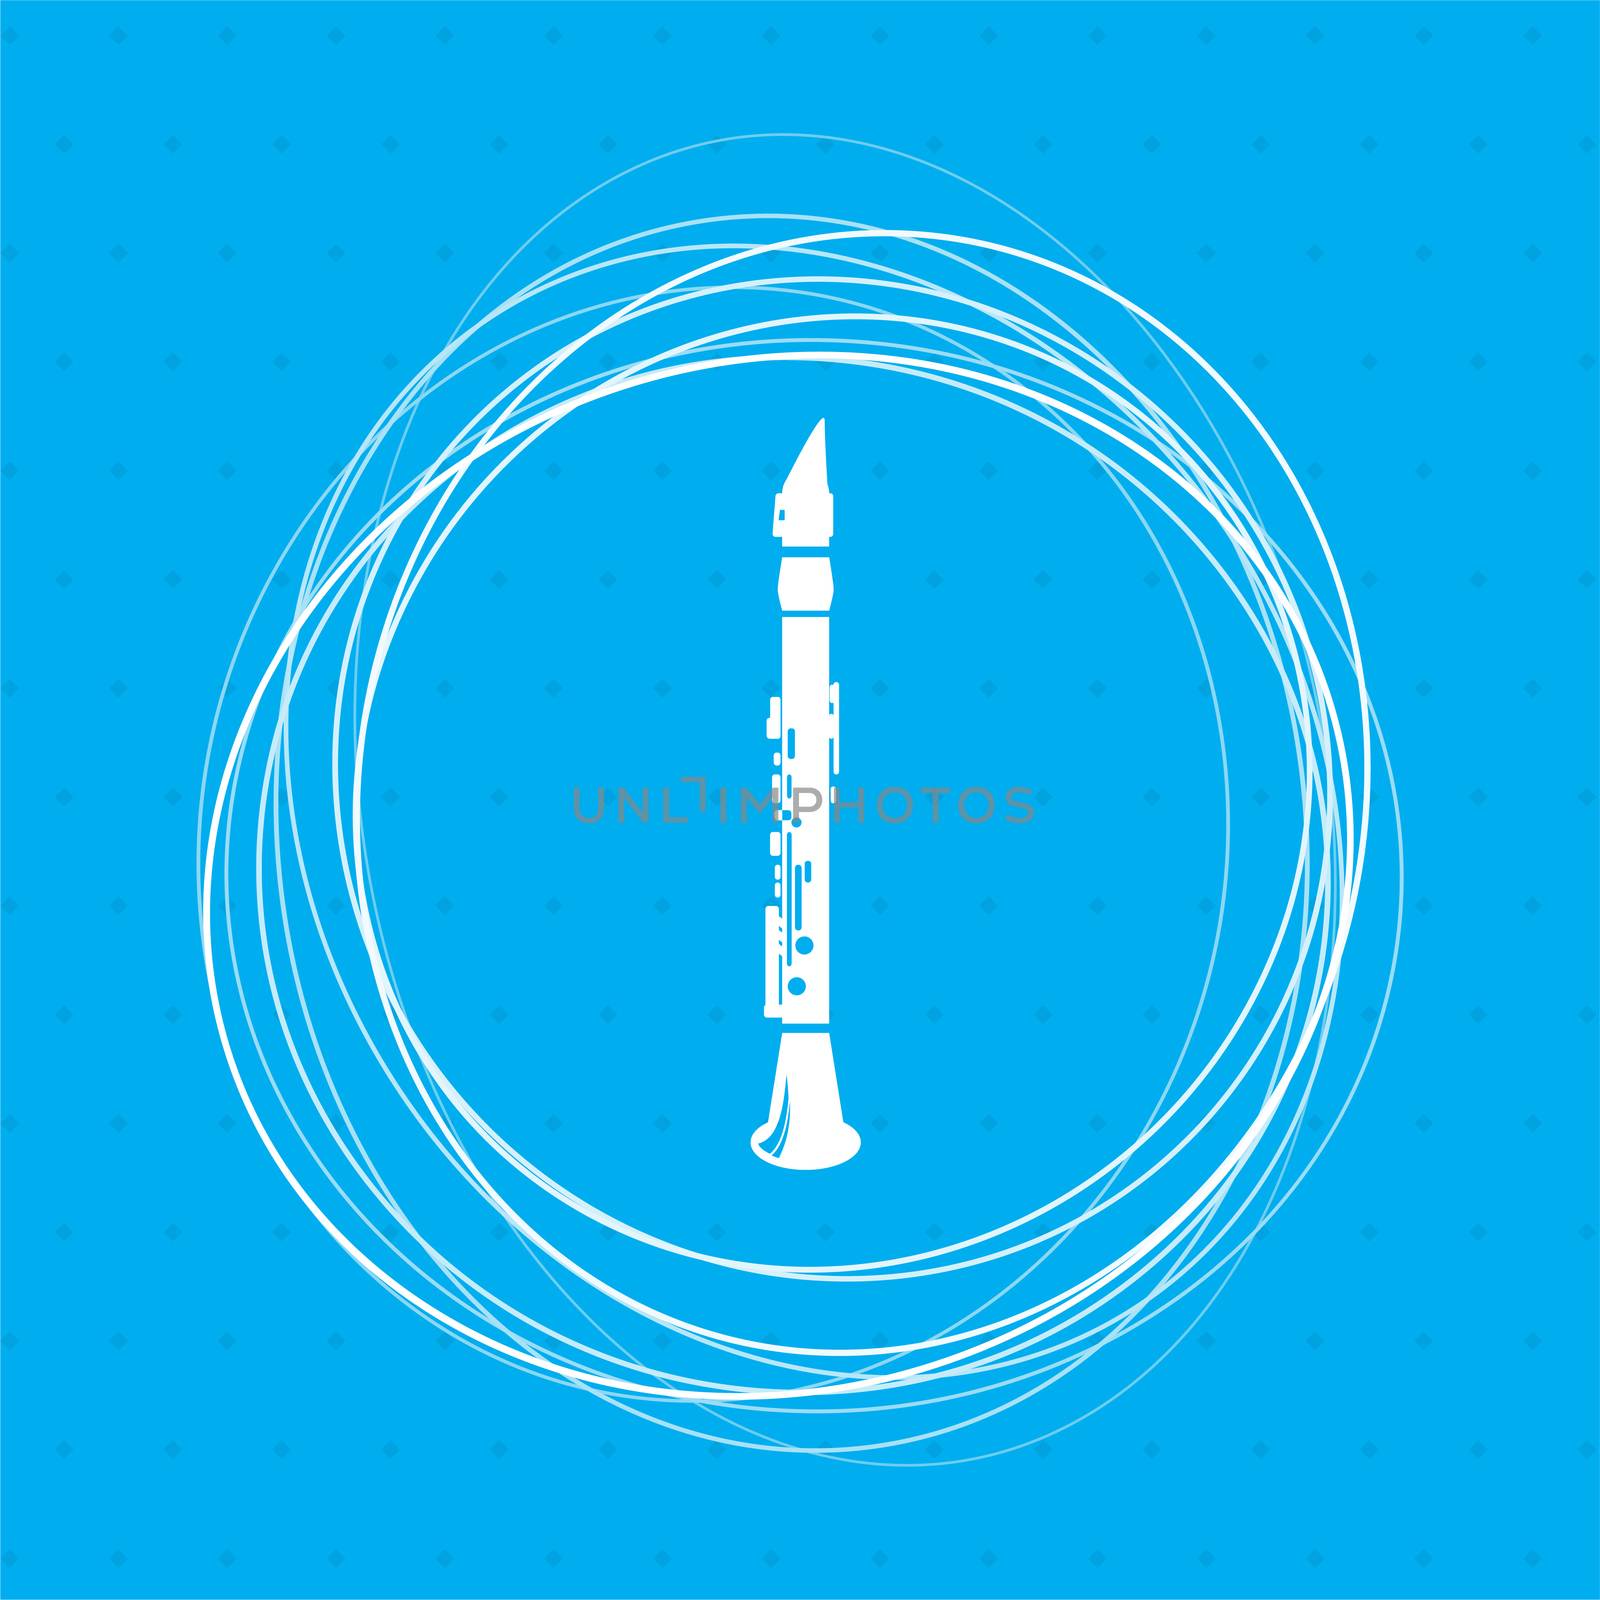 Clarinet icon on a blue background with abstract circles around and place for your text. illustration